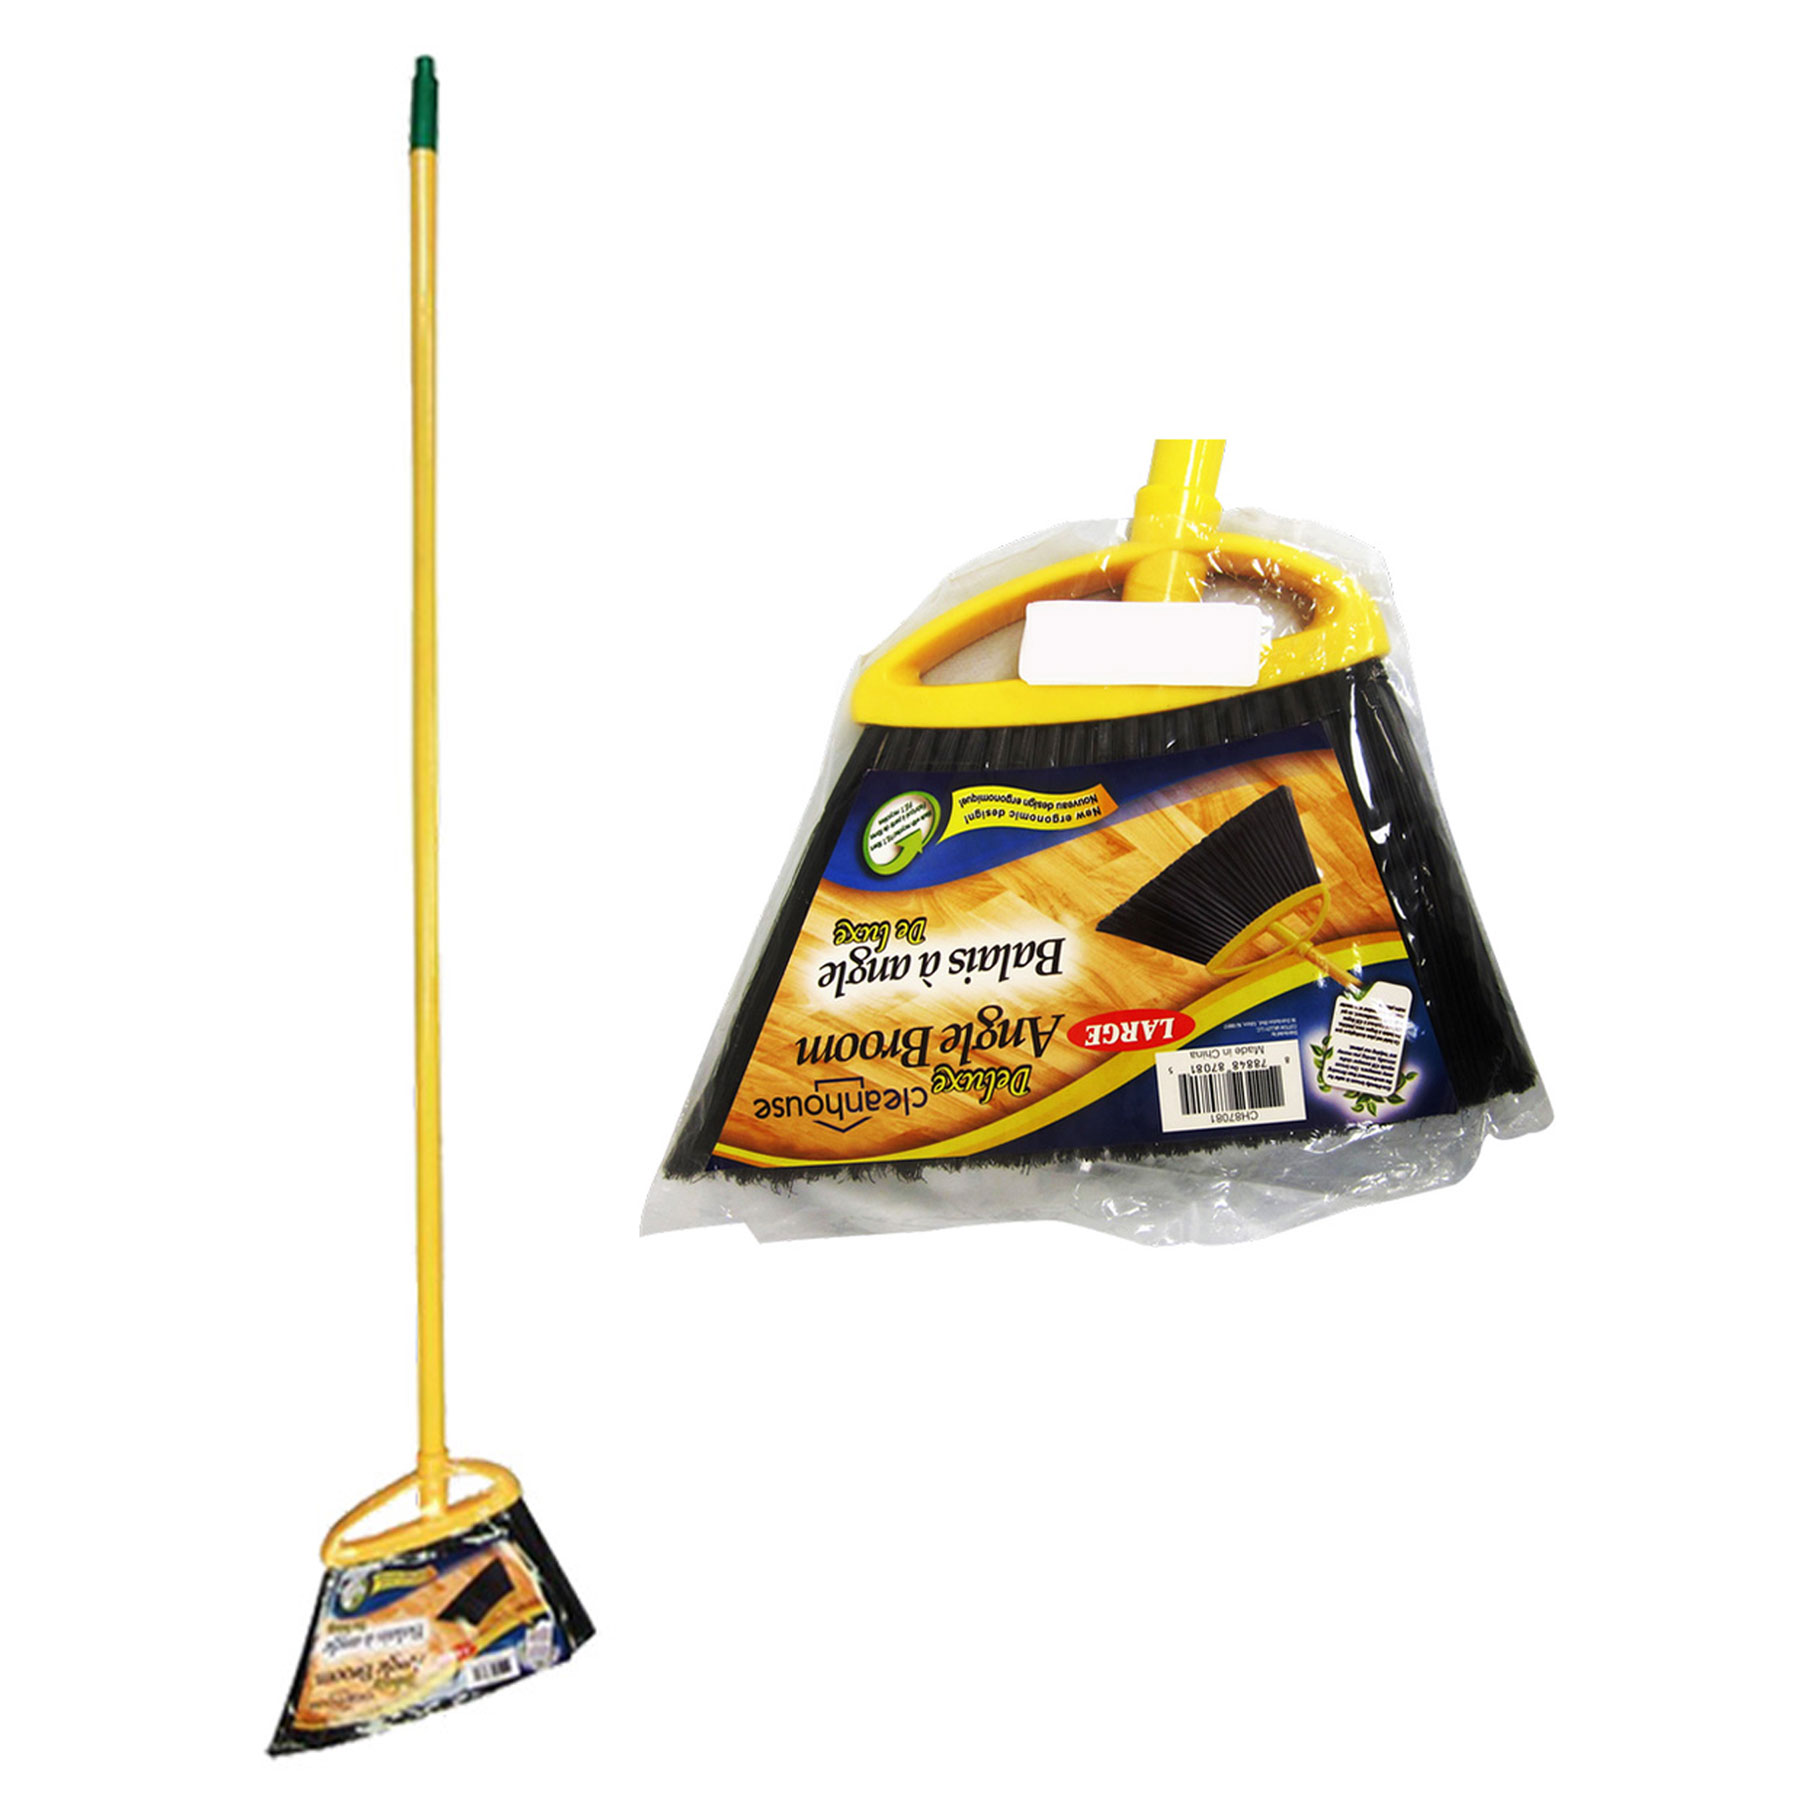 ANGLE BROOM DELUXE LG